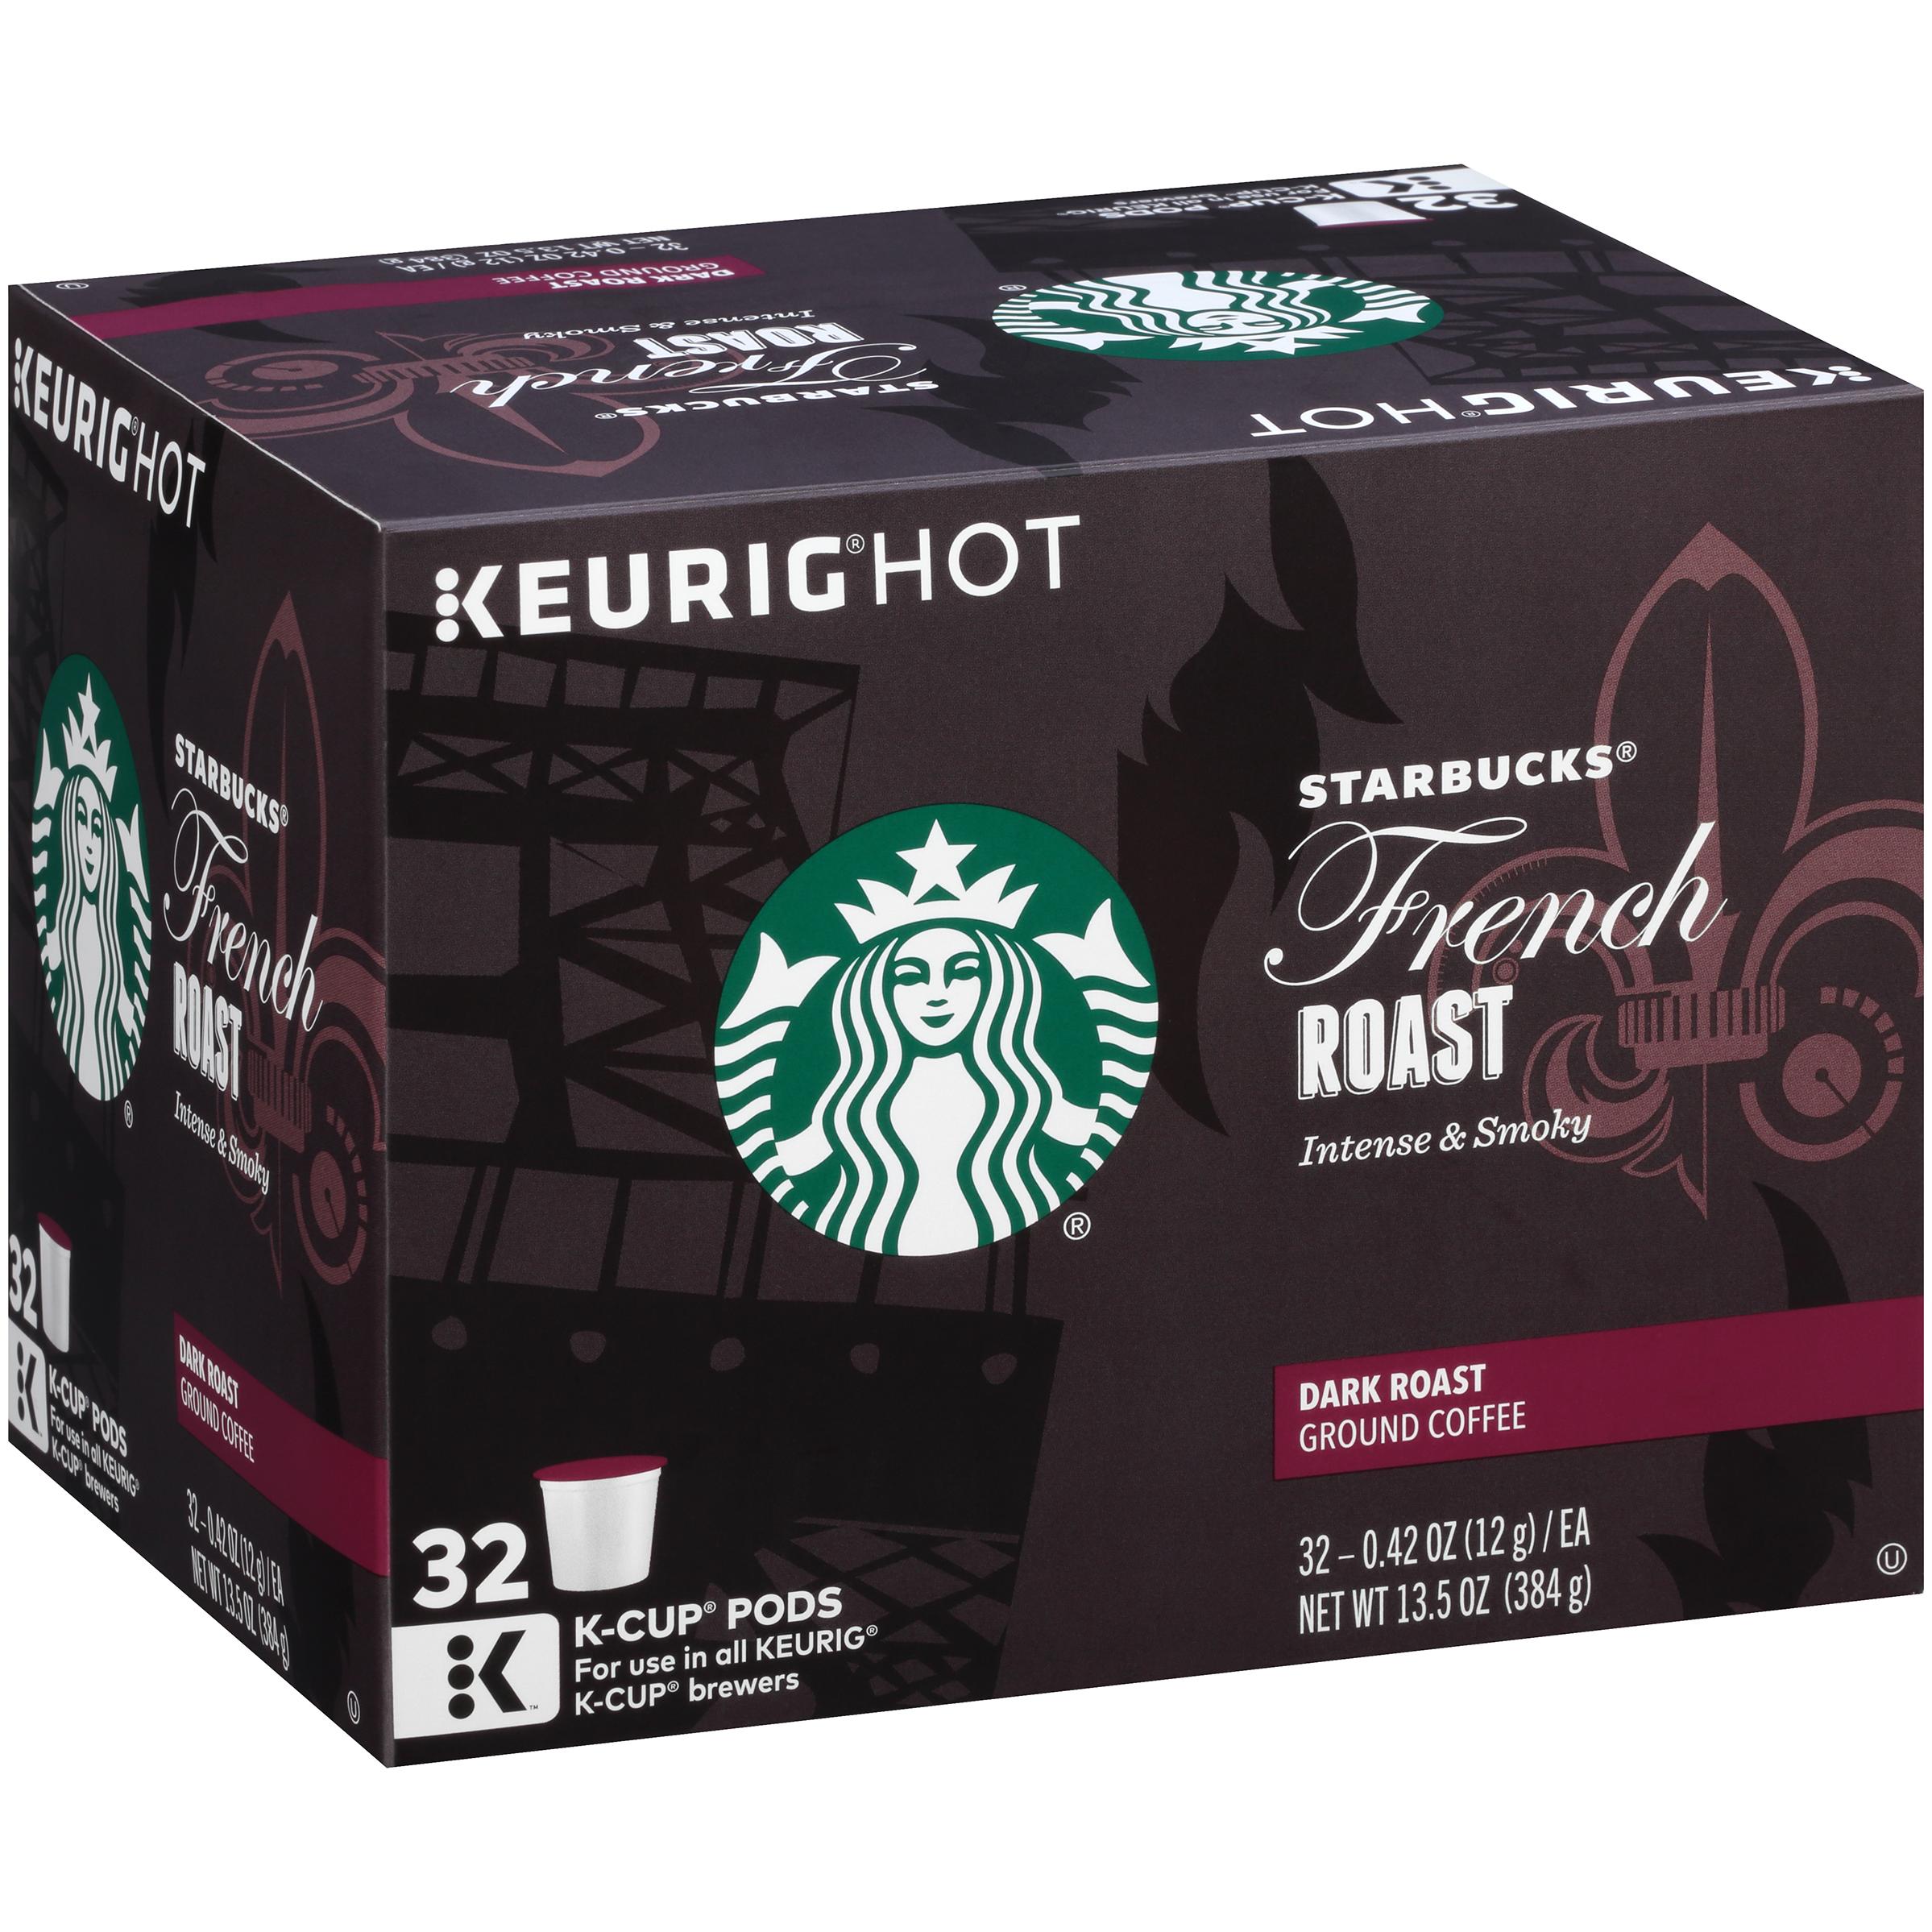  Enjoy the convenience of brewing a single cup of coffee with Starbucks® K-Cup® pods.